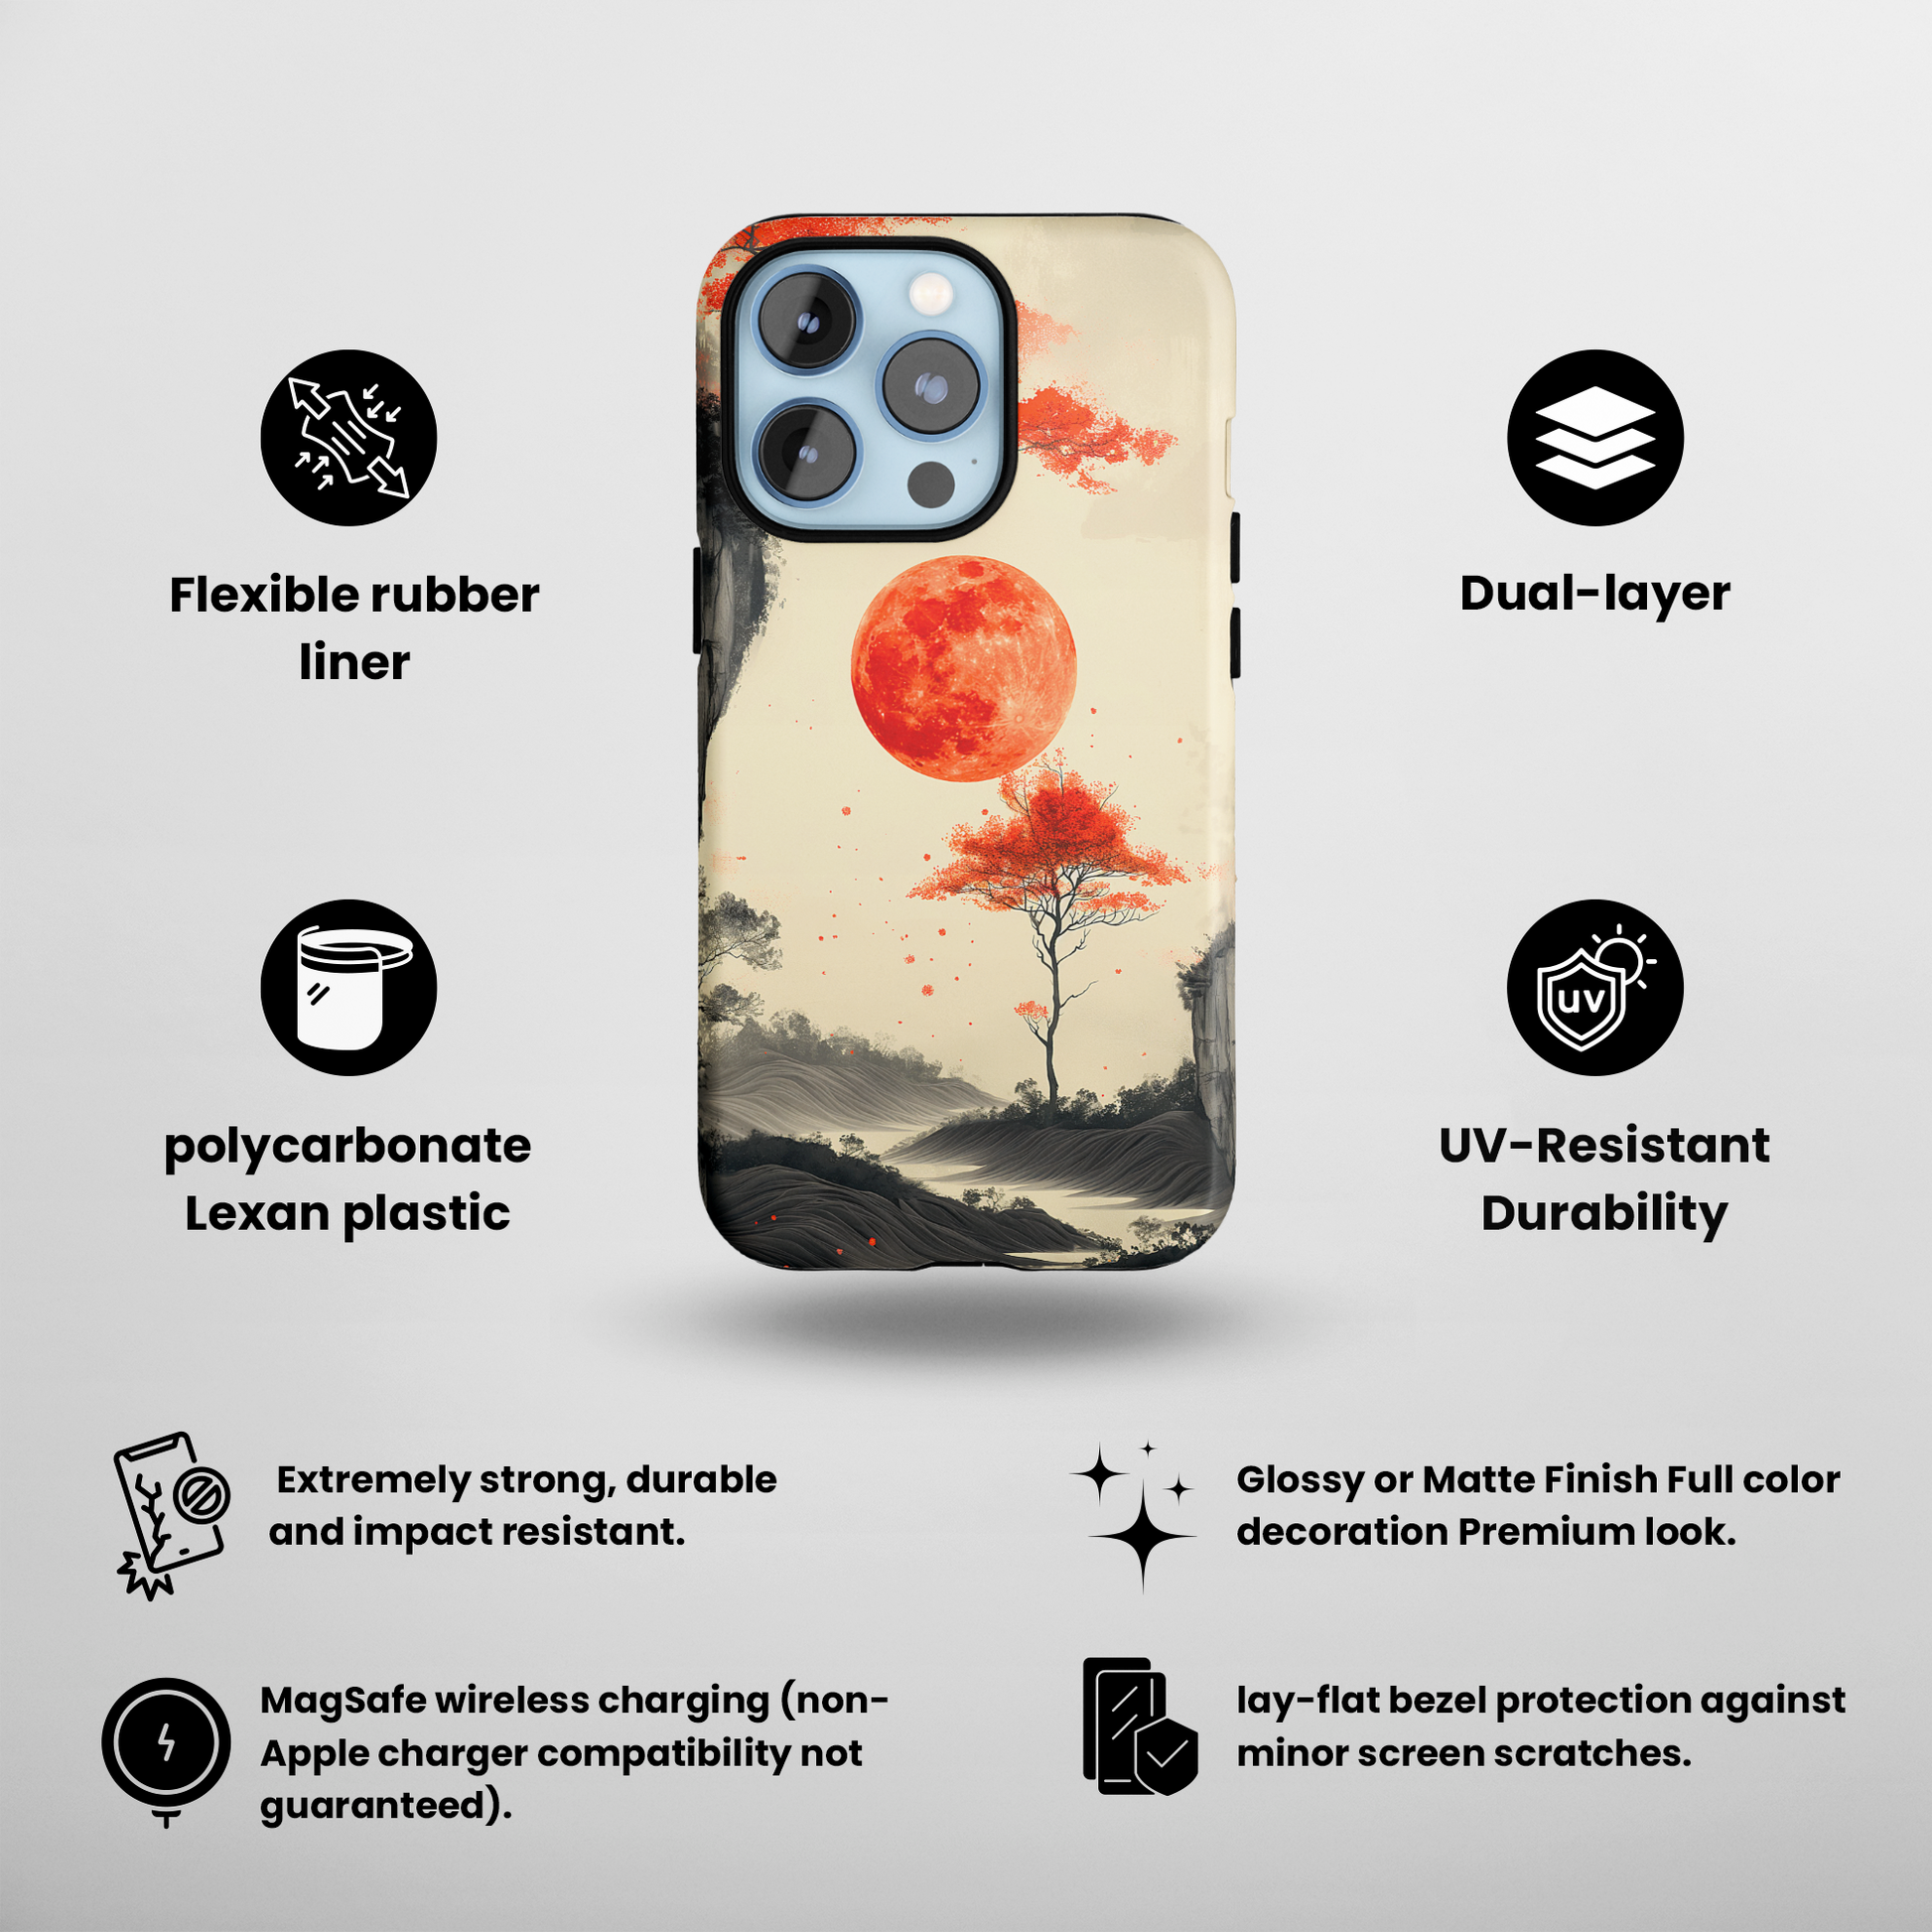 Scarlet Moonrise (iPhone MagSafe Case)Elevate your iPhone's style with Artistic scenery with red trees and large moon MagSafe Case, offering robust protection, MagSafe compatibility, and a choice of mattRimaGallery